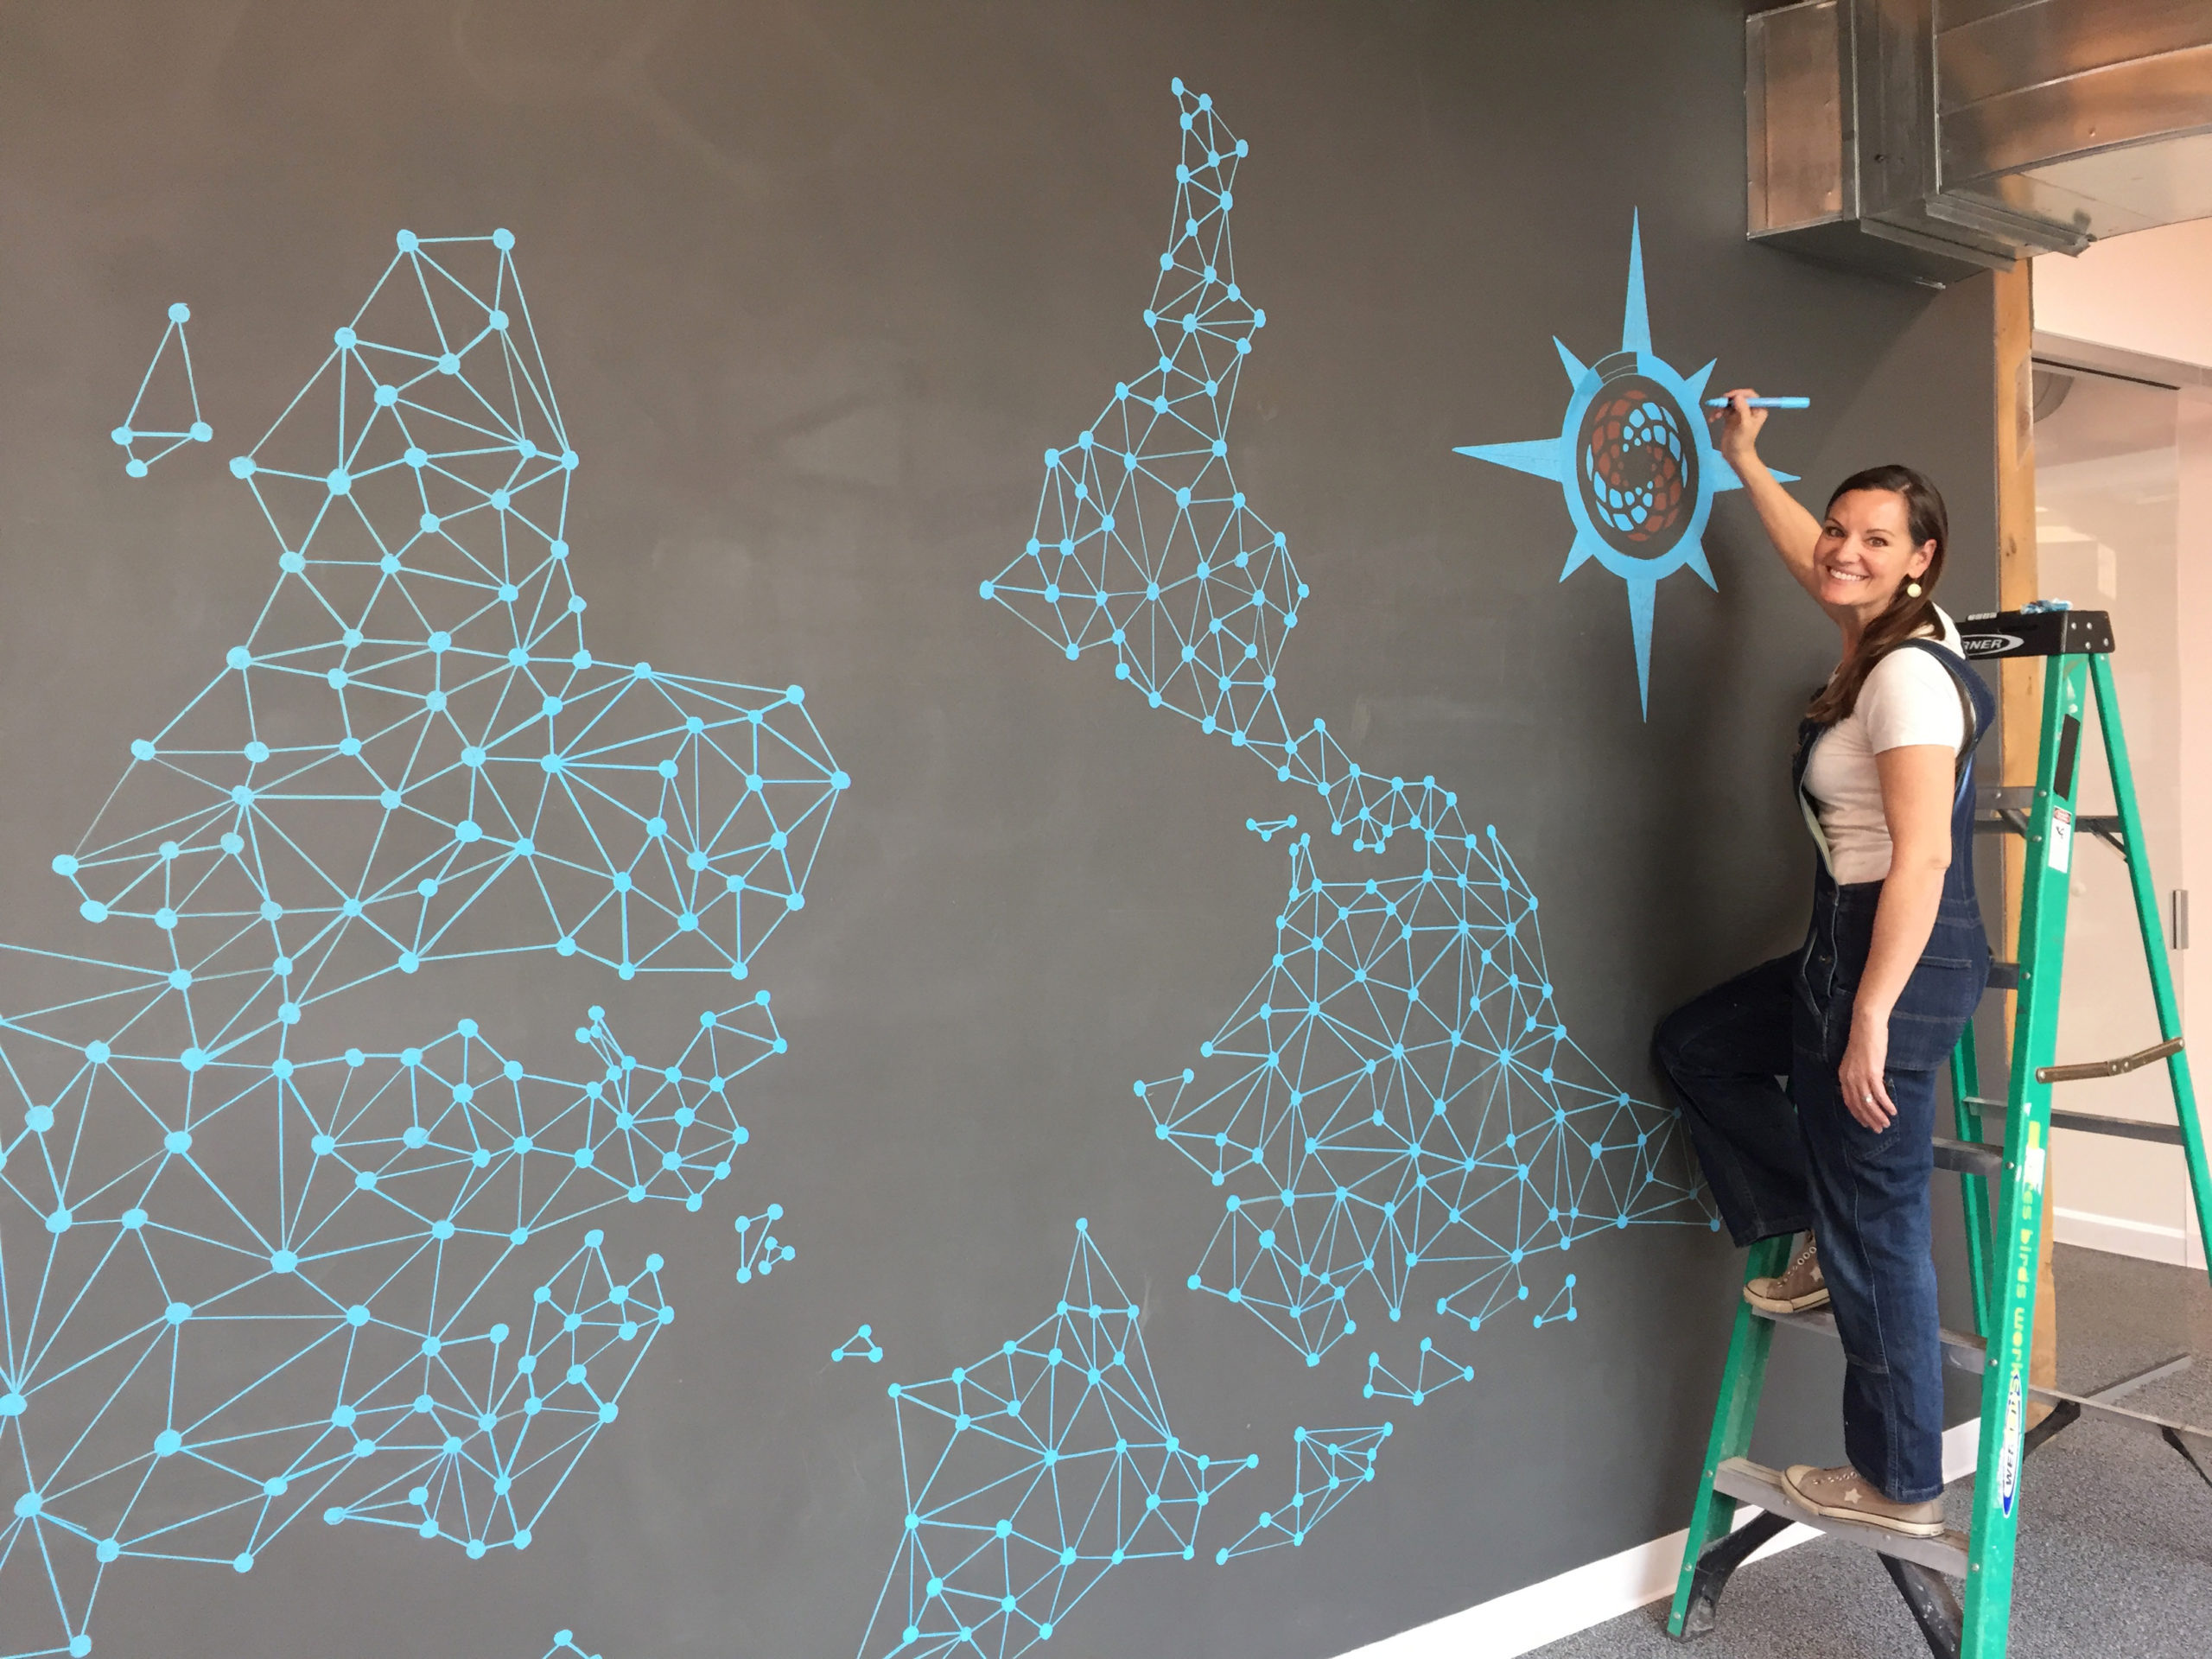 World Connected Mural Commissioned for Symposium 2020